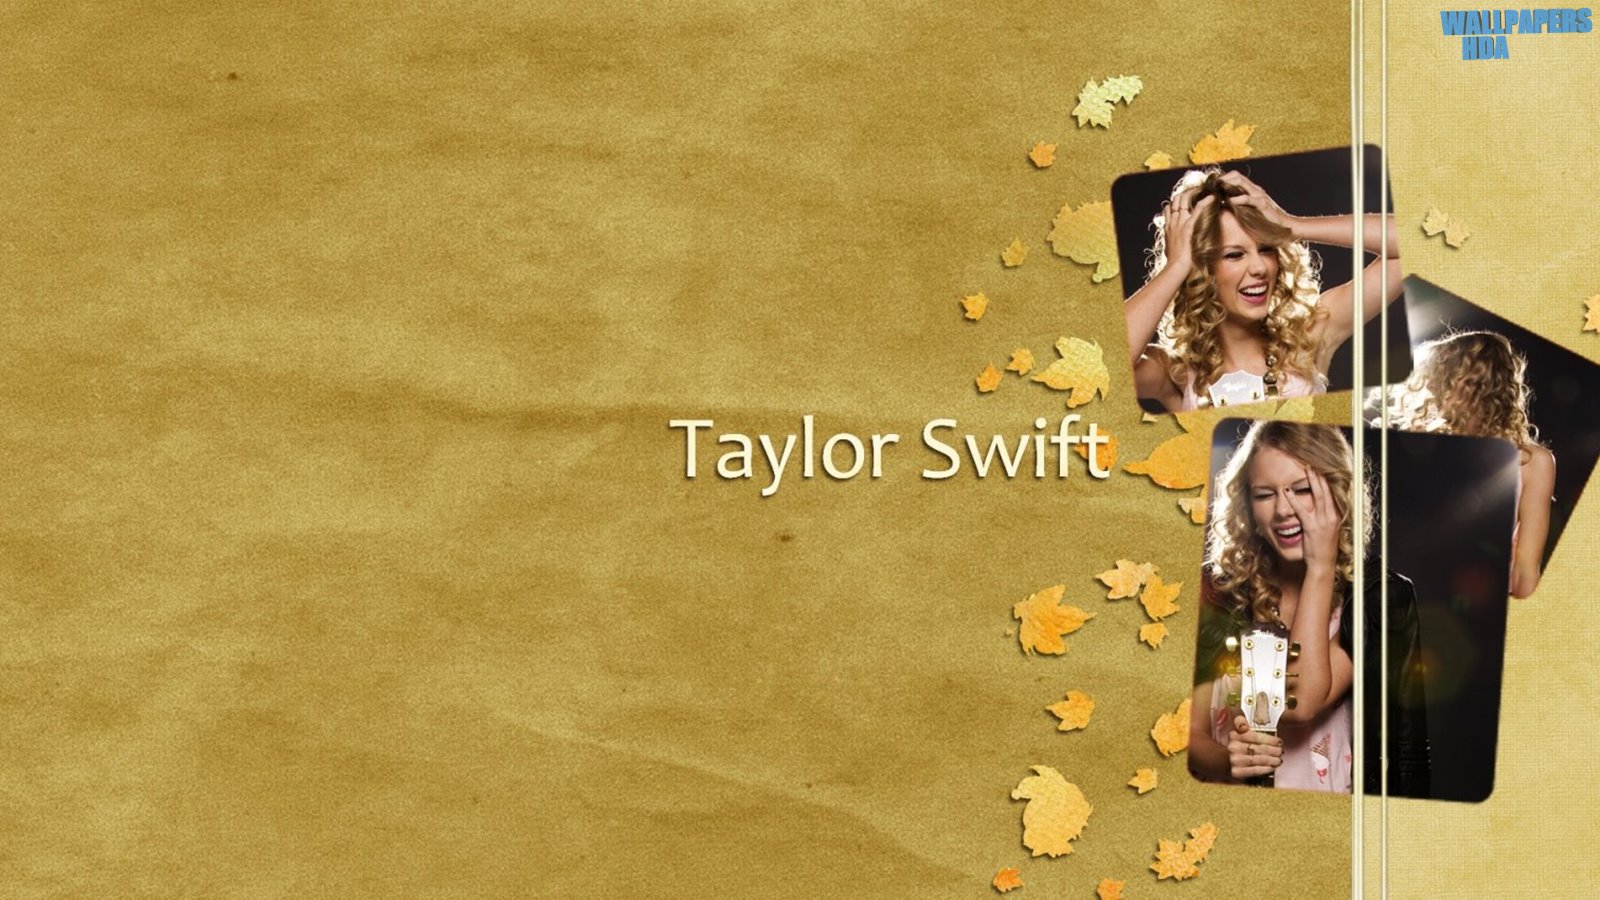 Taylor swift excited wallpaper 1600x900